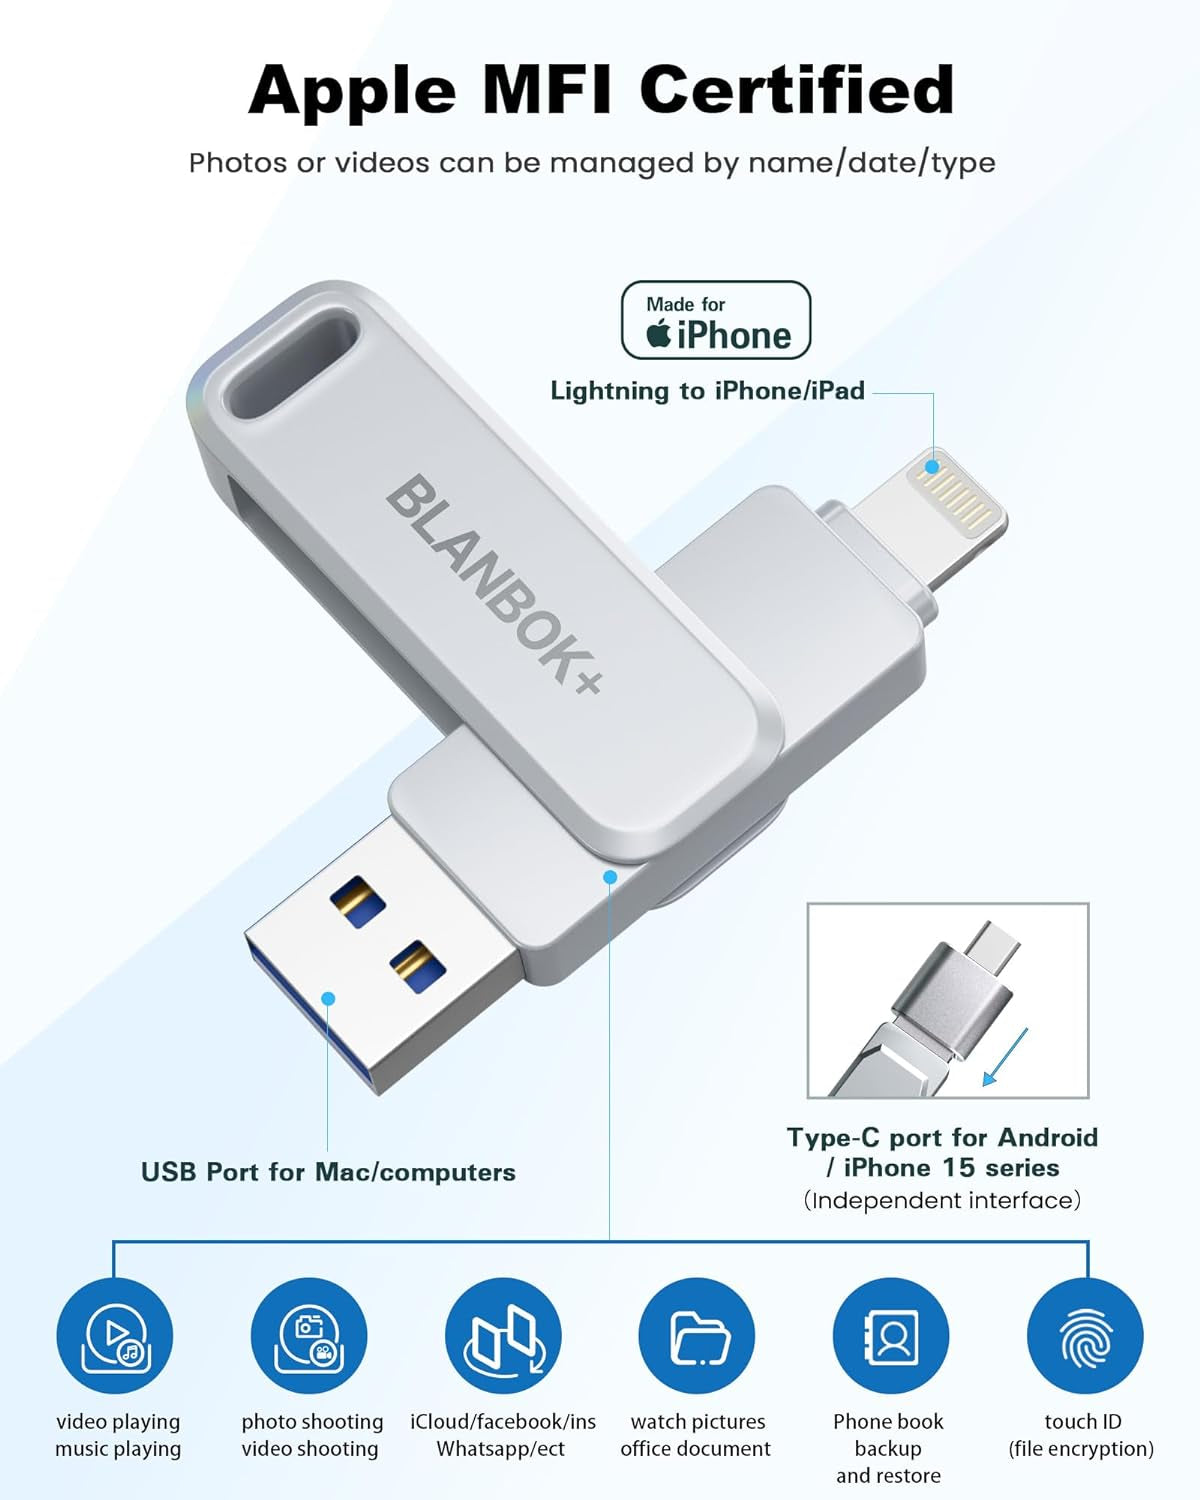 Mfi Certified 128GB Photo Stick for Iphone Flash Drive,Usb Memory Stick Thumb Drives High Speed USB Stick External Storage Compatible for Iphone/Ipad/Android/Pc